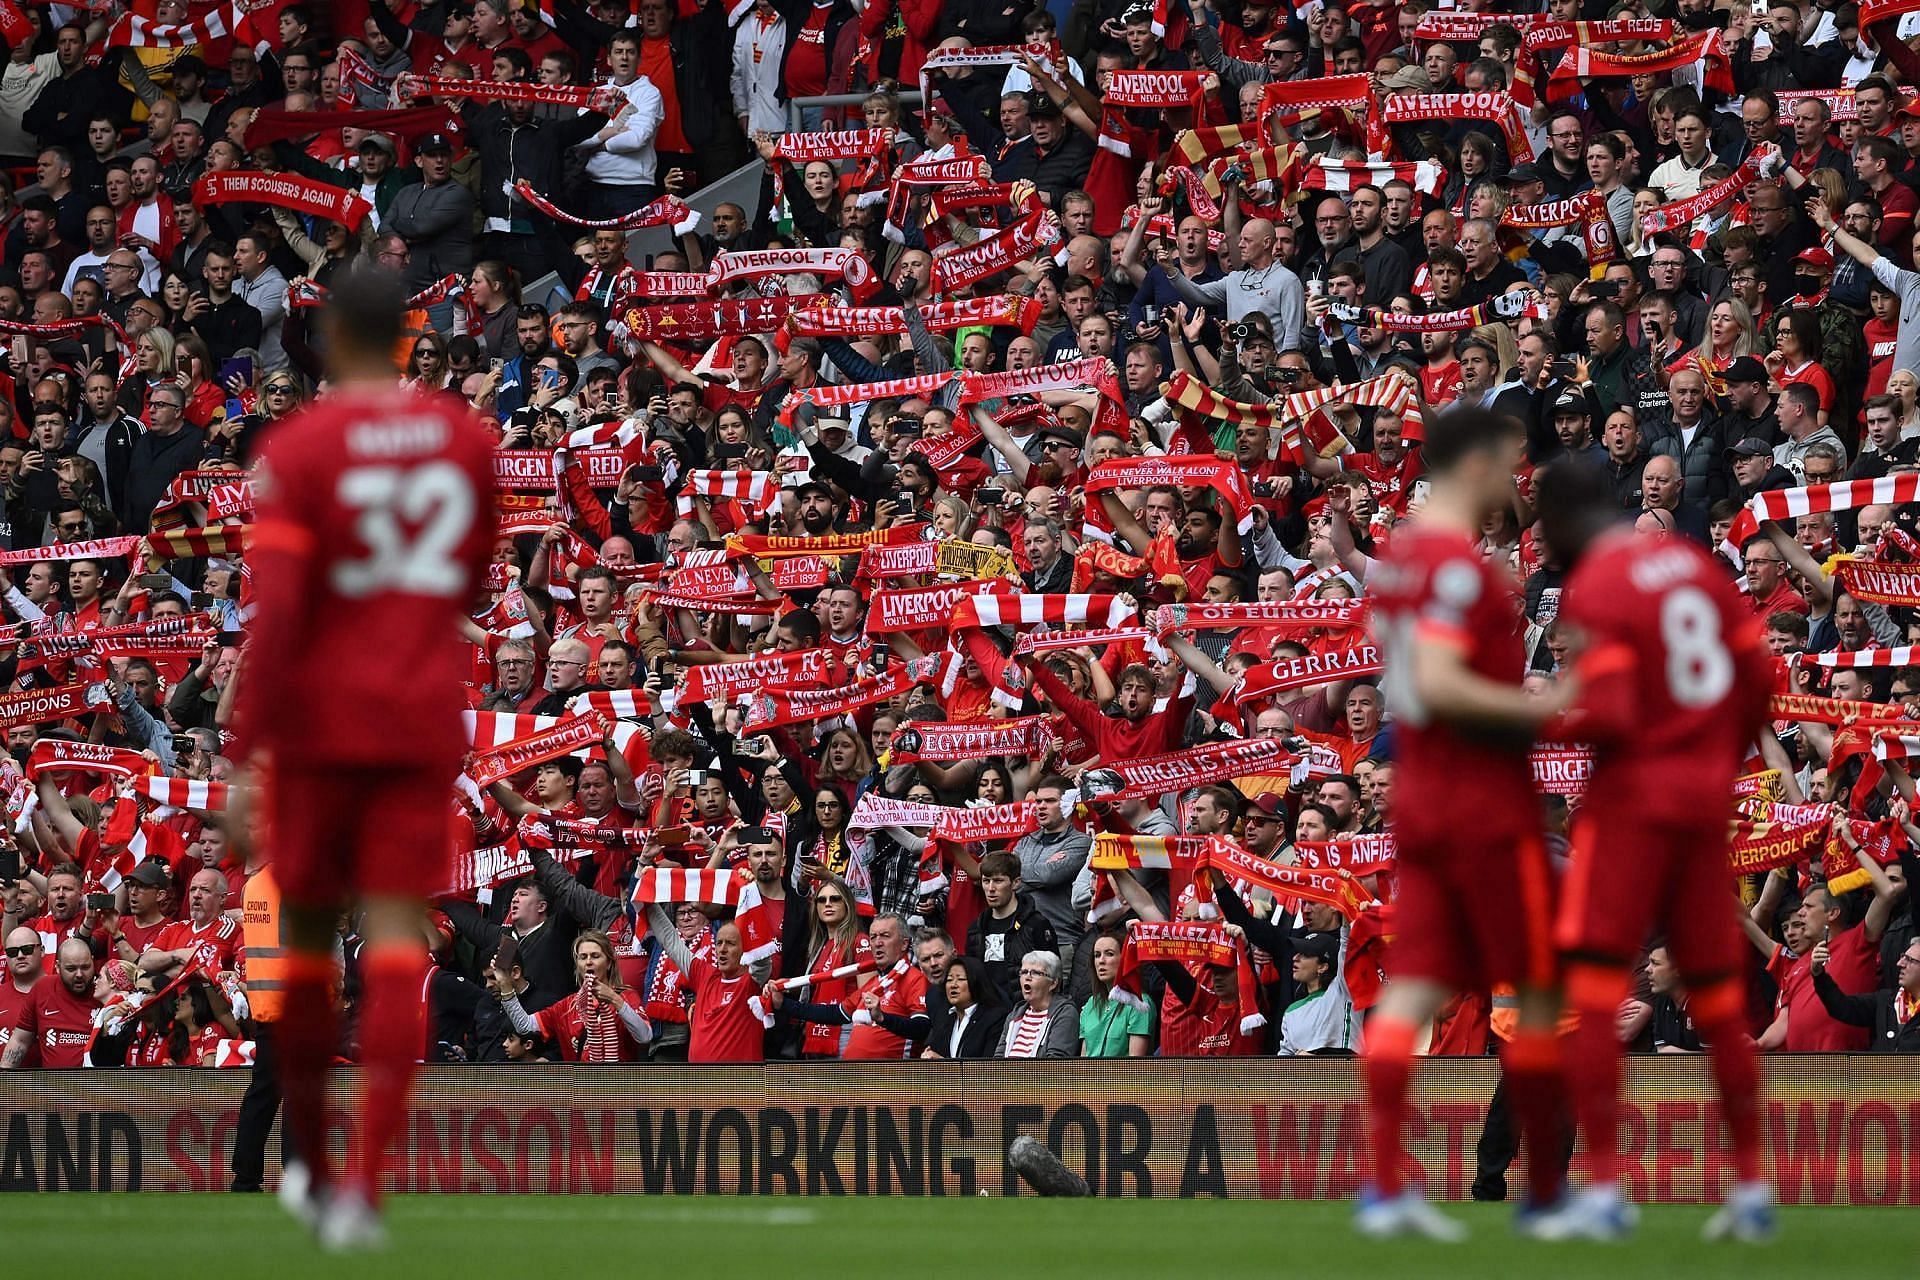 The Reds, at Anfield, could still a huge threat to the opposition.